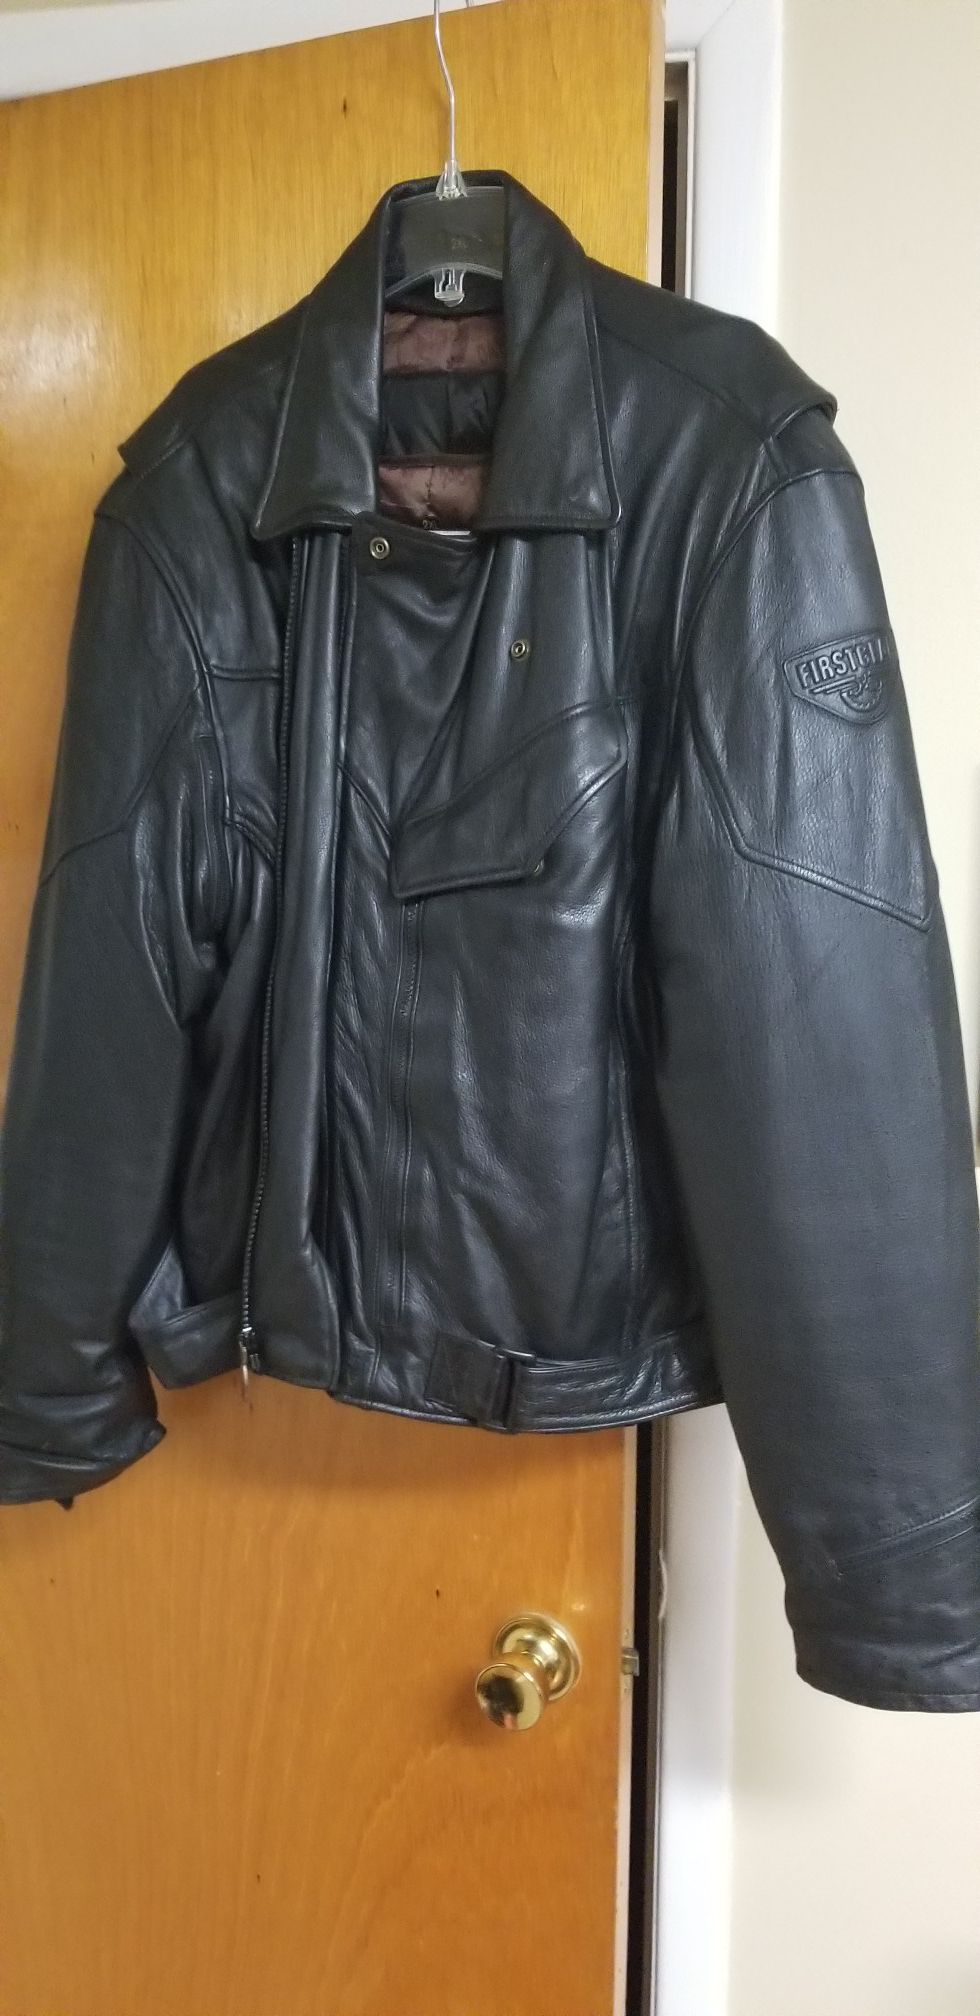 Two men's motorcycle jackets 2XL